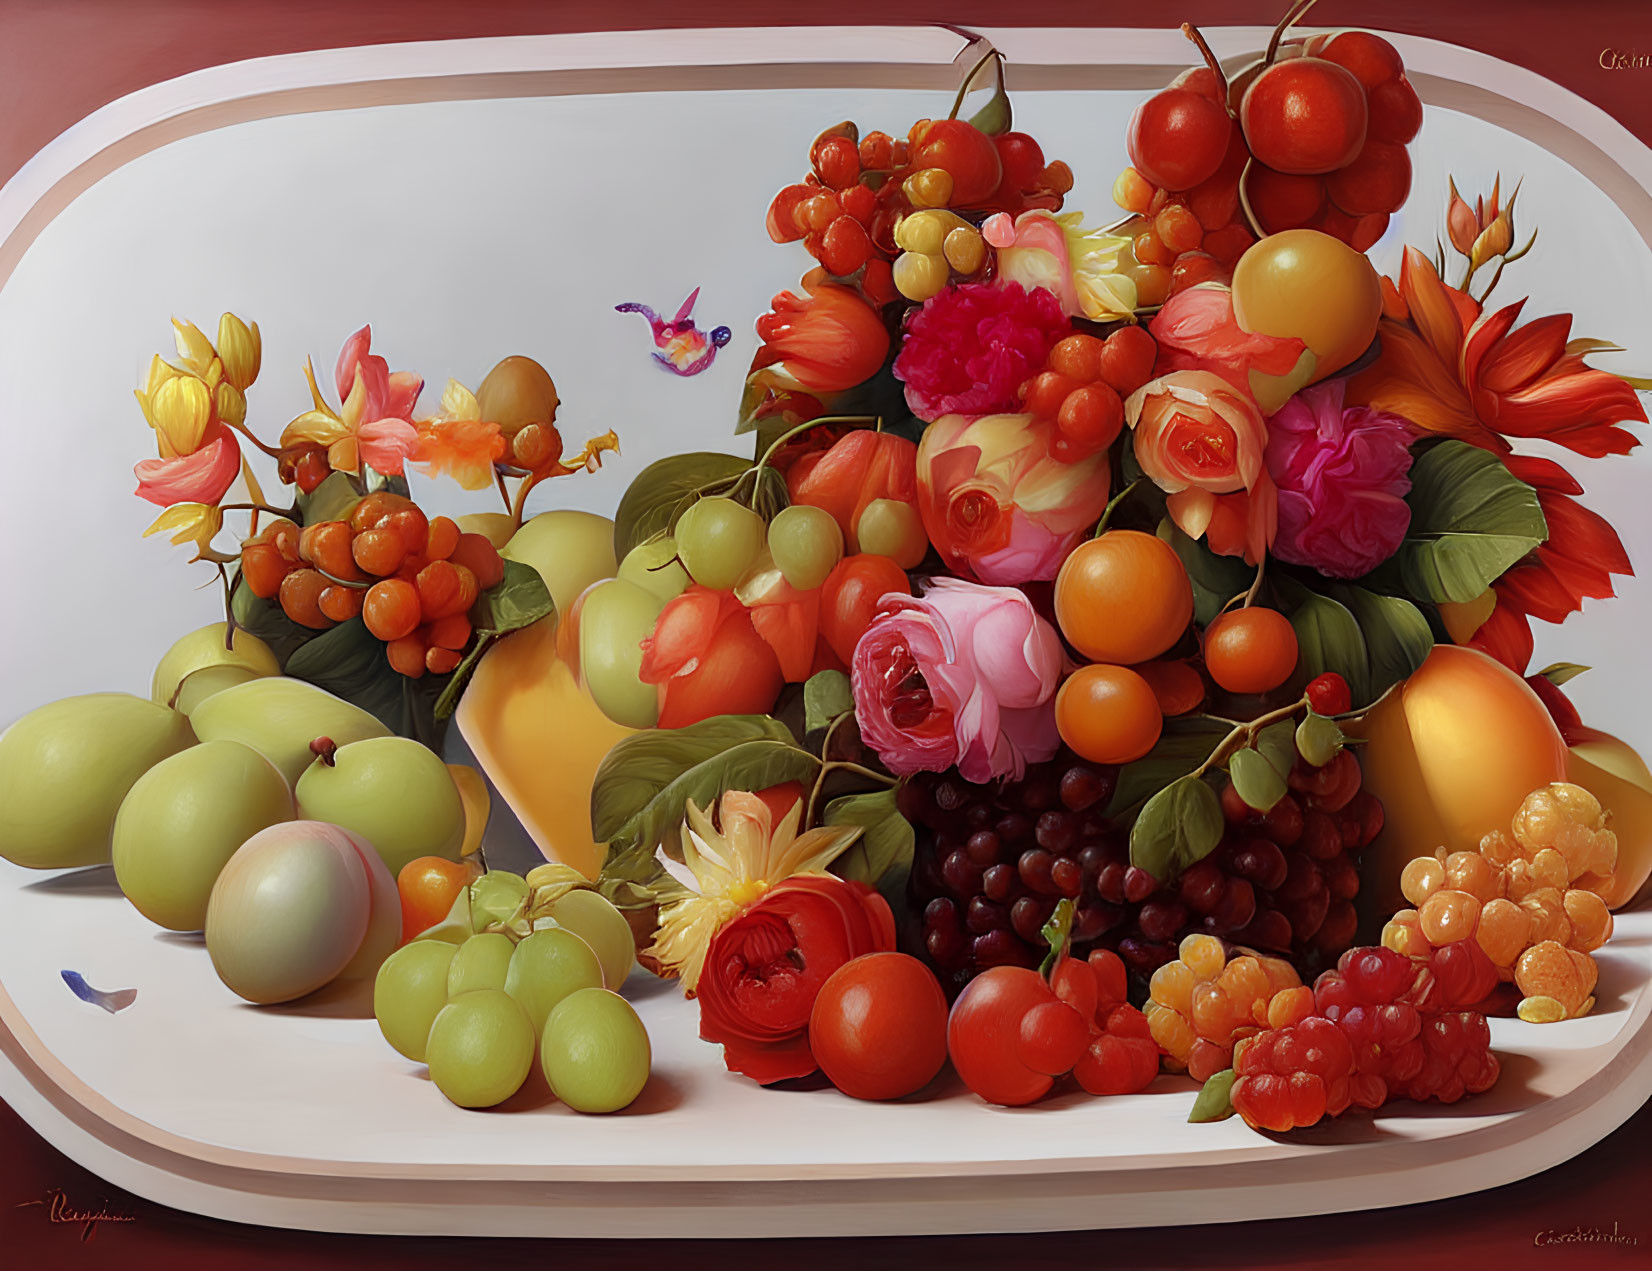 Colorful fruits and flowers still life with butterfly in vibrant painting